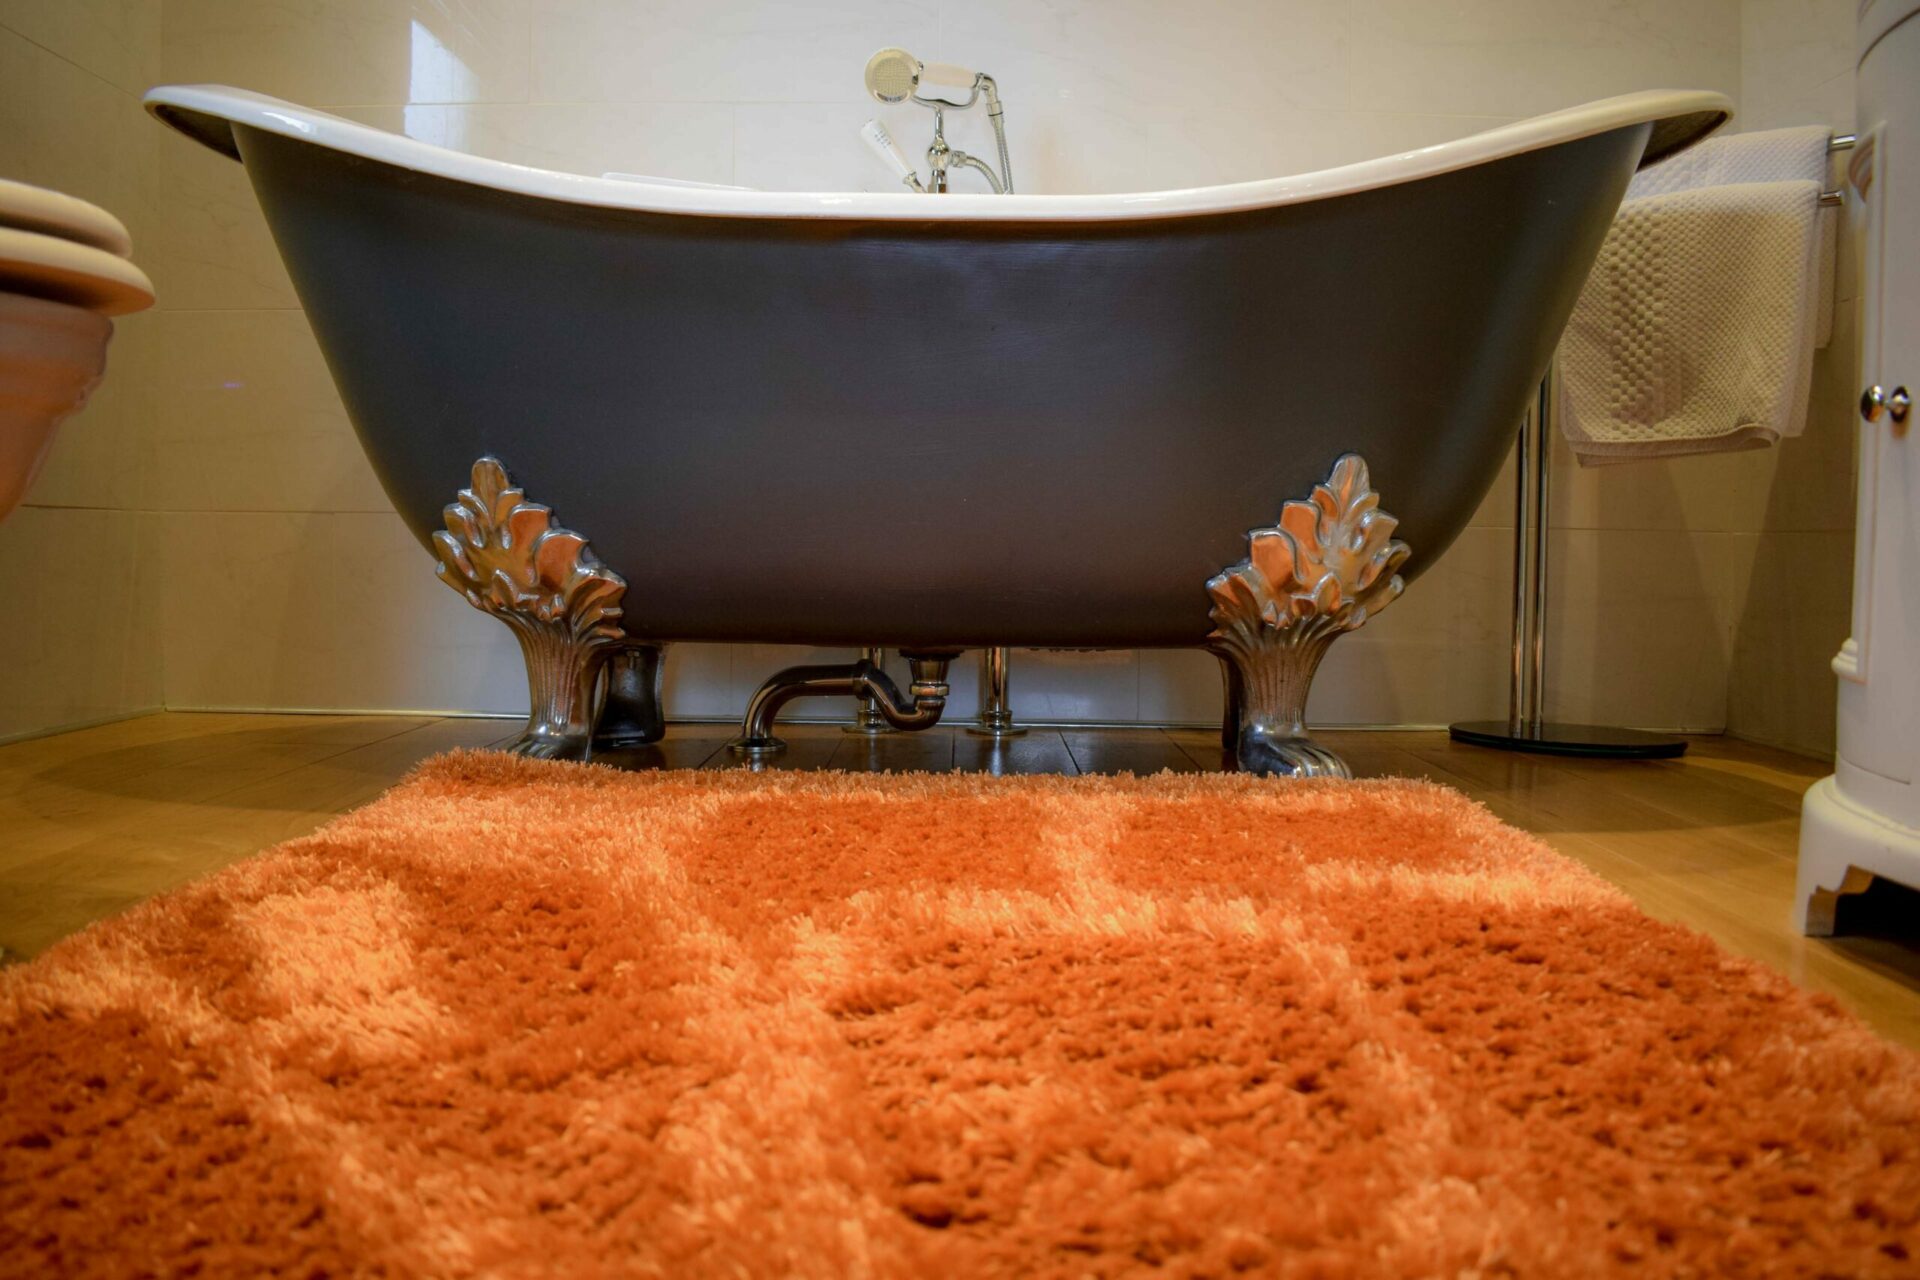 Our Allanbreck Luxury Hideaway has a beautiful claw footed free standing bath to soak in